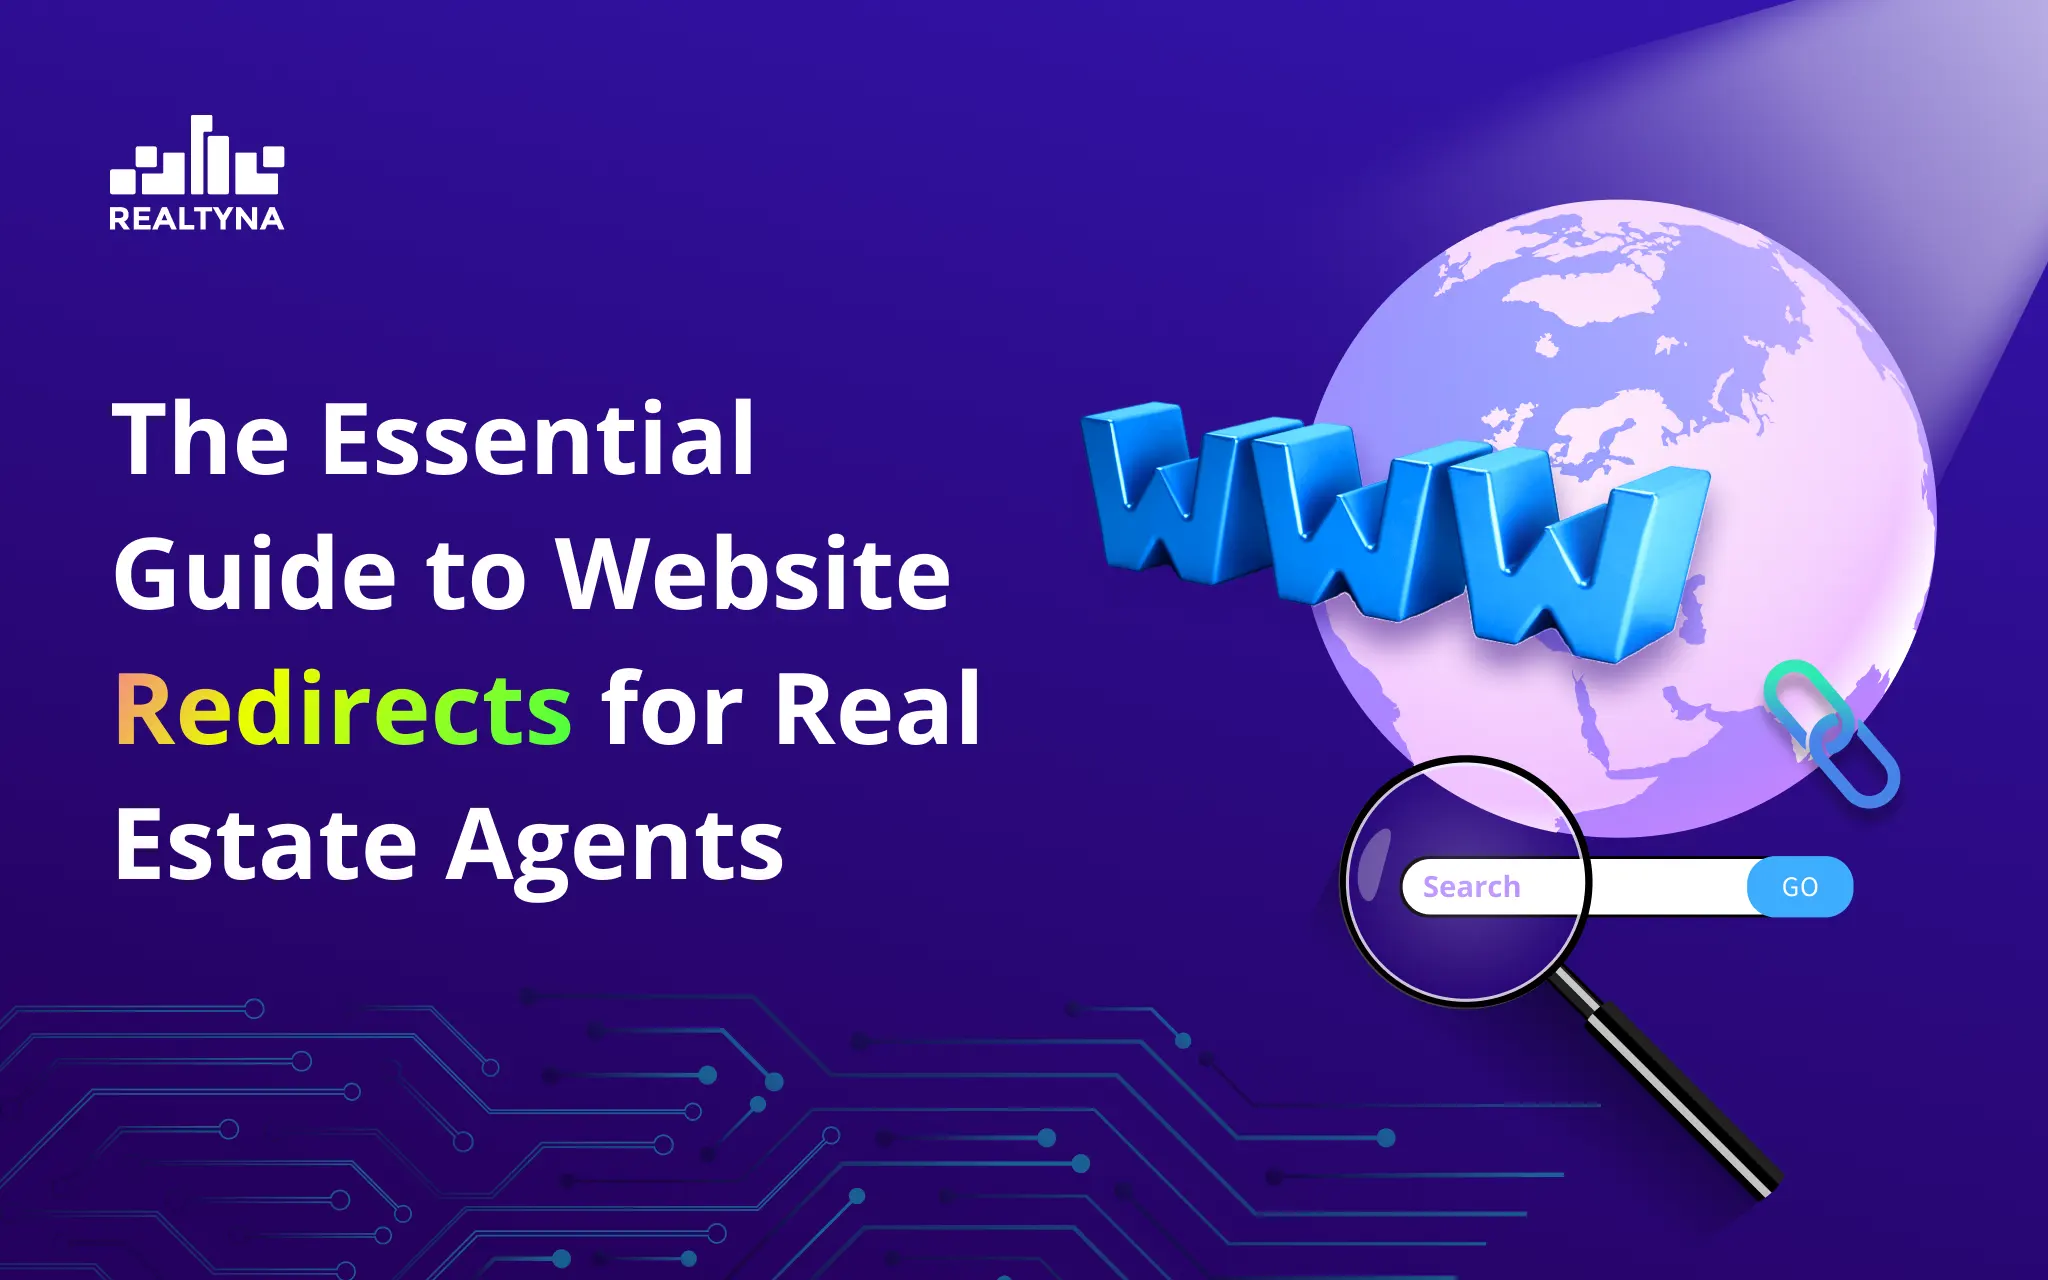 The Essential Guide to Website Redirects for Real Estate Agents